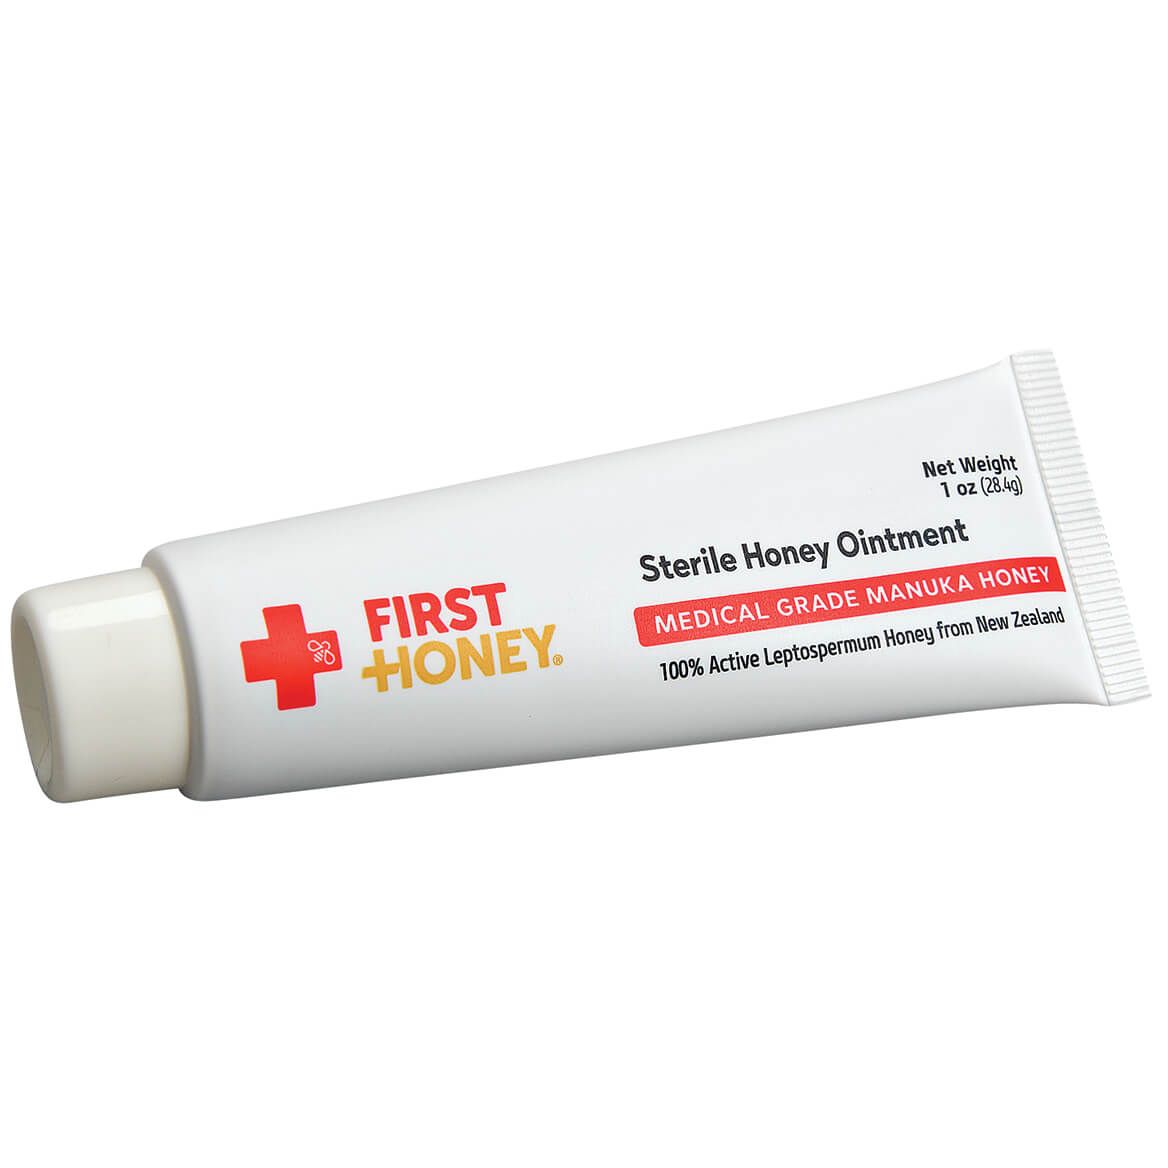 First Honey® Sterile Honey Ointment, 1oz. + '-' + 369385